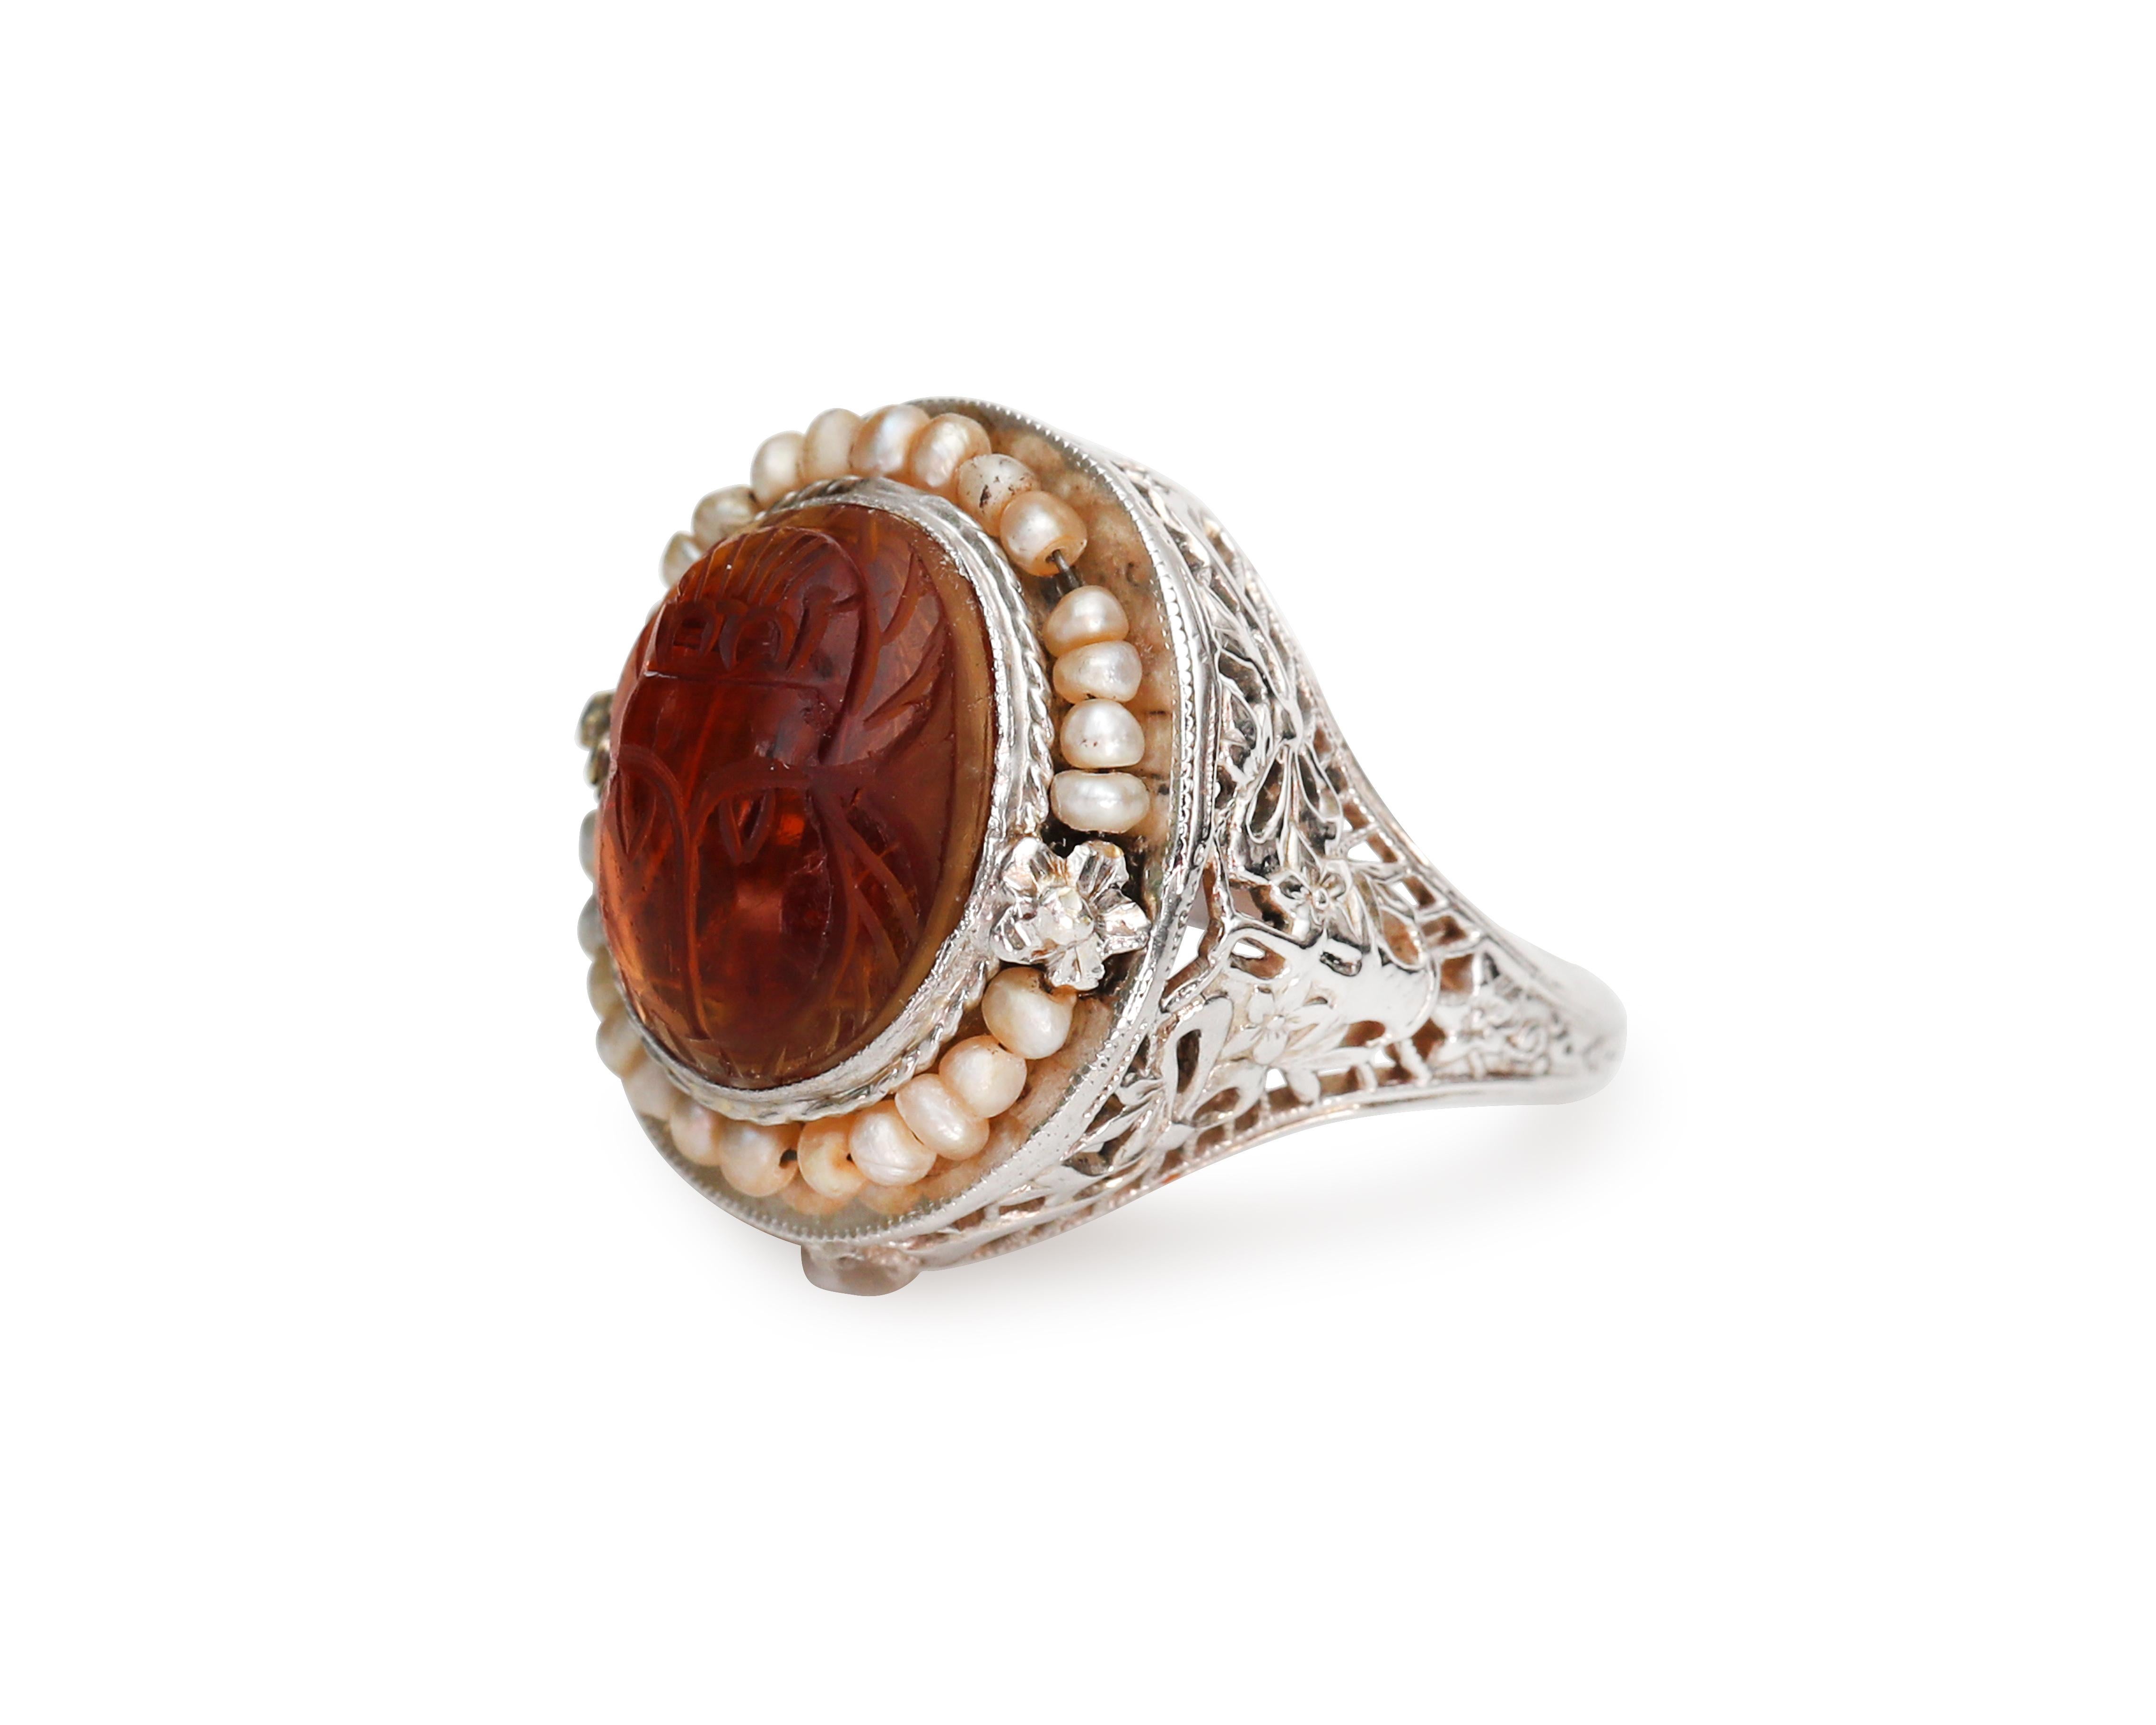 Victorian 14K White Gold Filigree Ring, Scarab Carved Carnelian Seed Pearl Halo 2